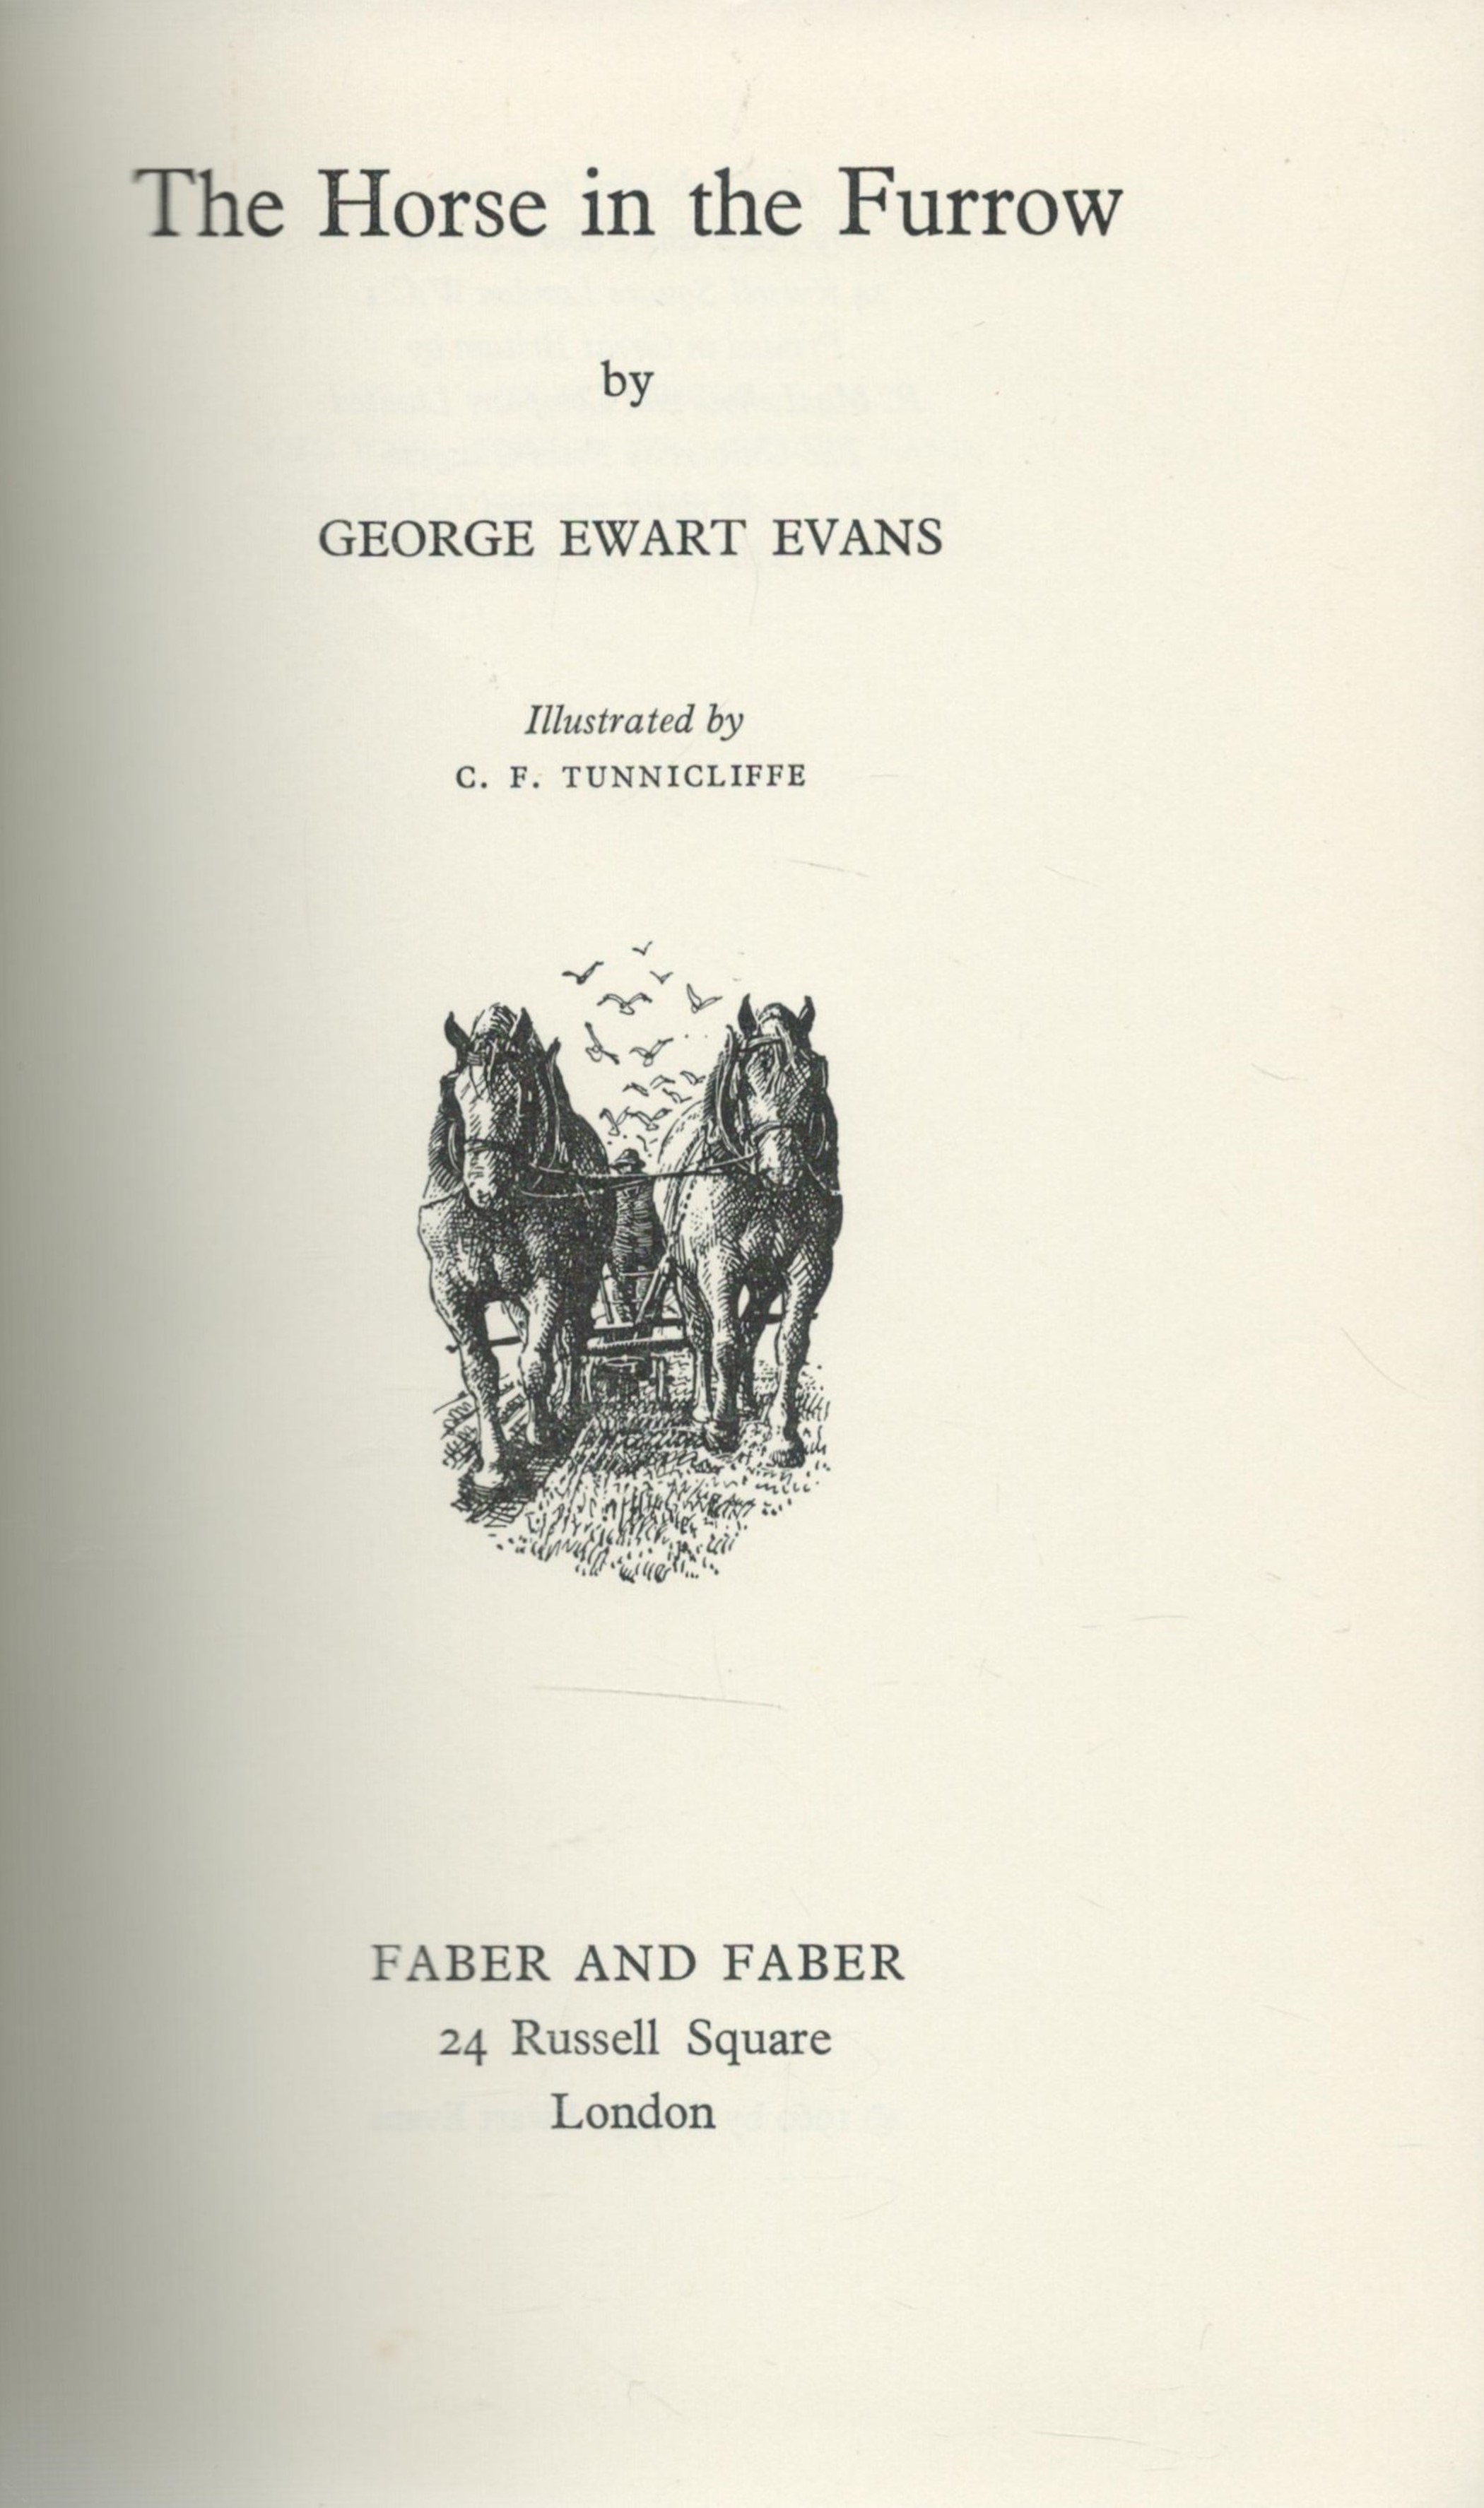 The Horse In The Furrow by George Ewart Evans 1960 First Edition Hardback Book with 292 pages - Image 2 of 3